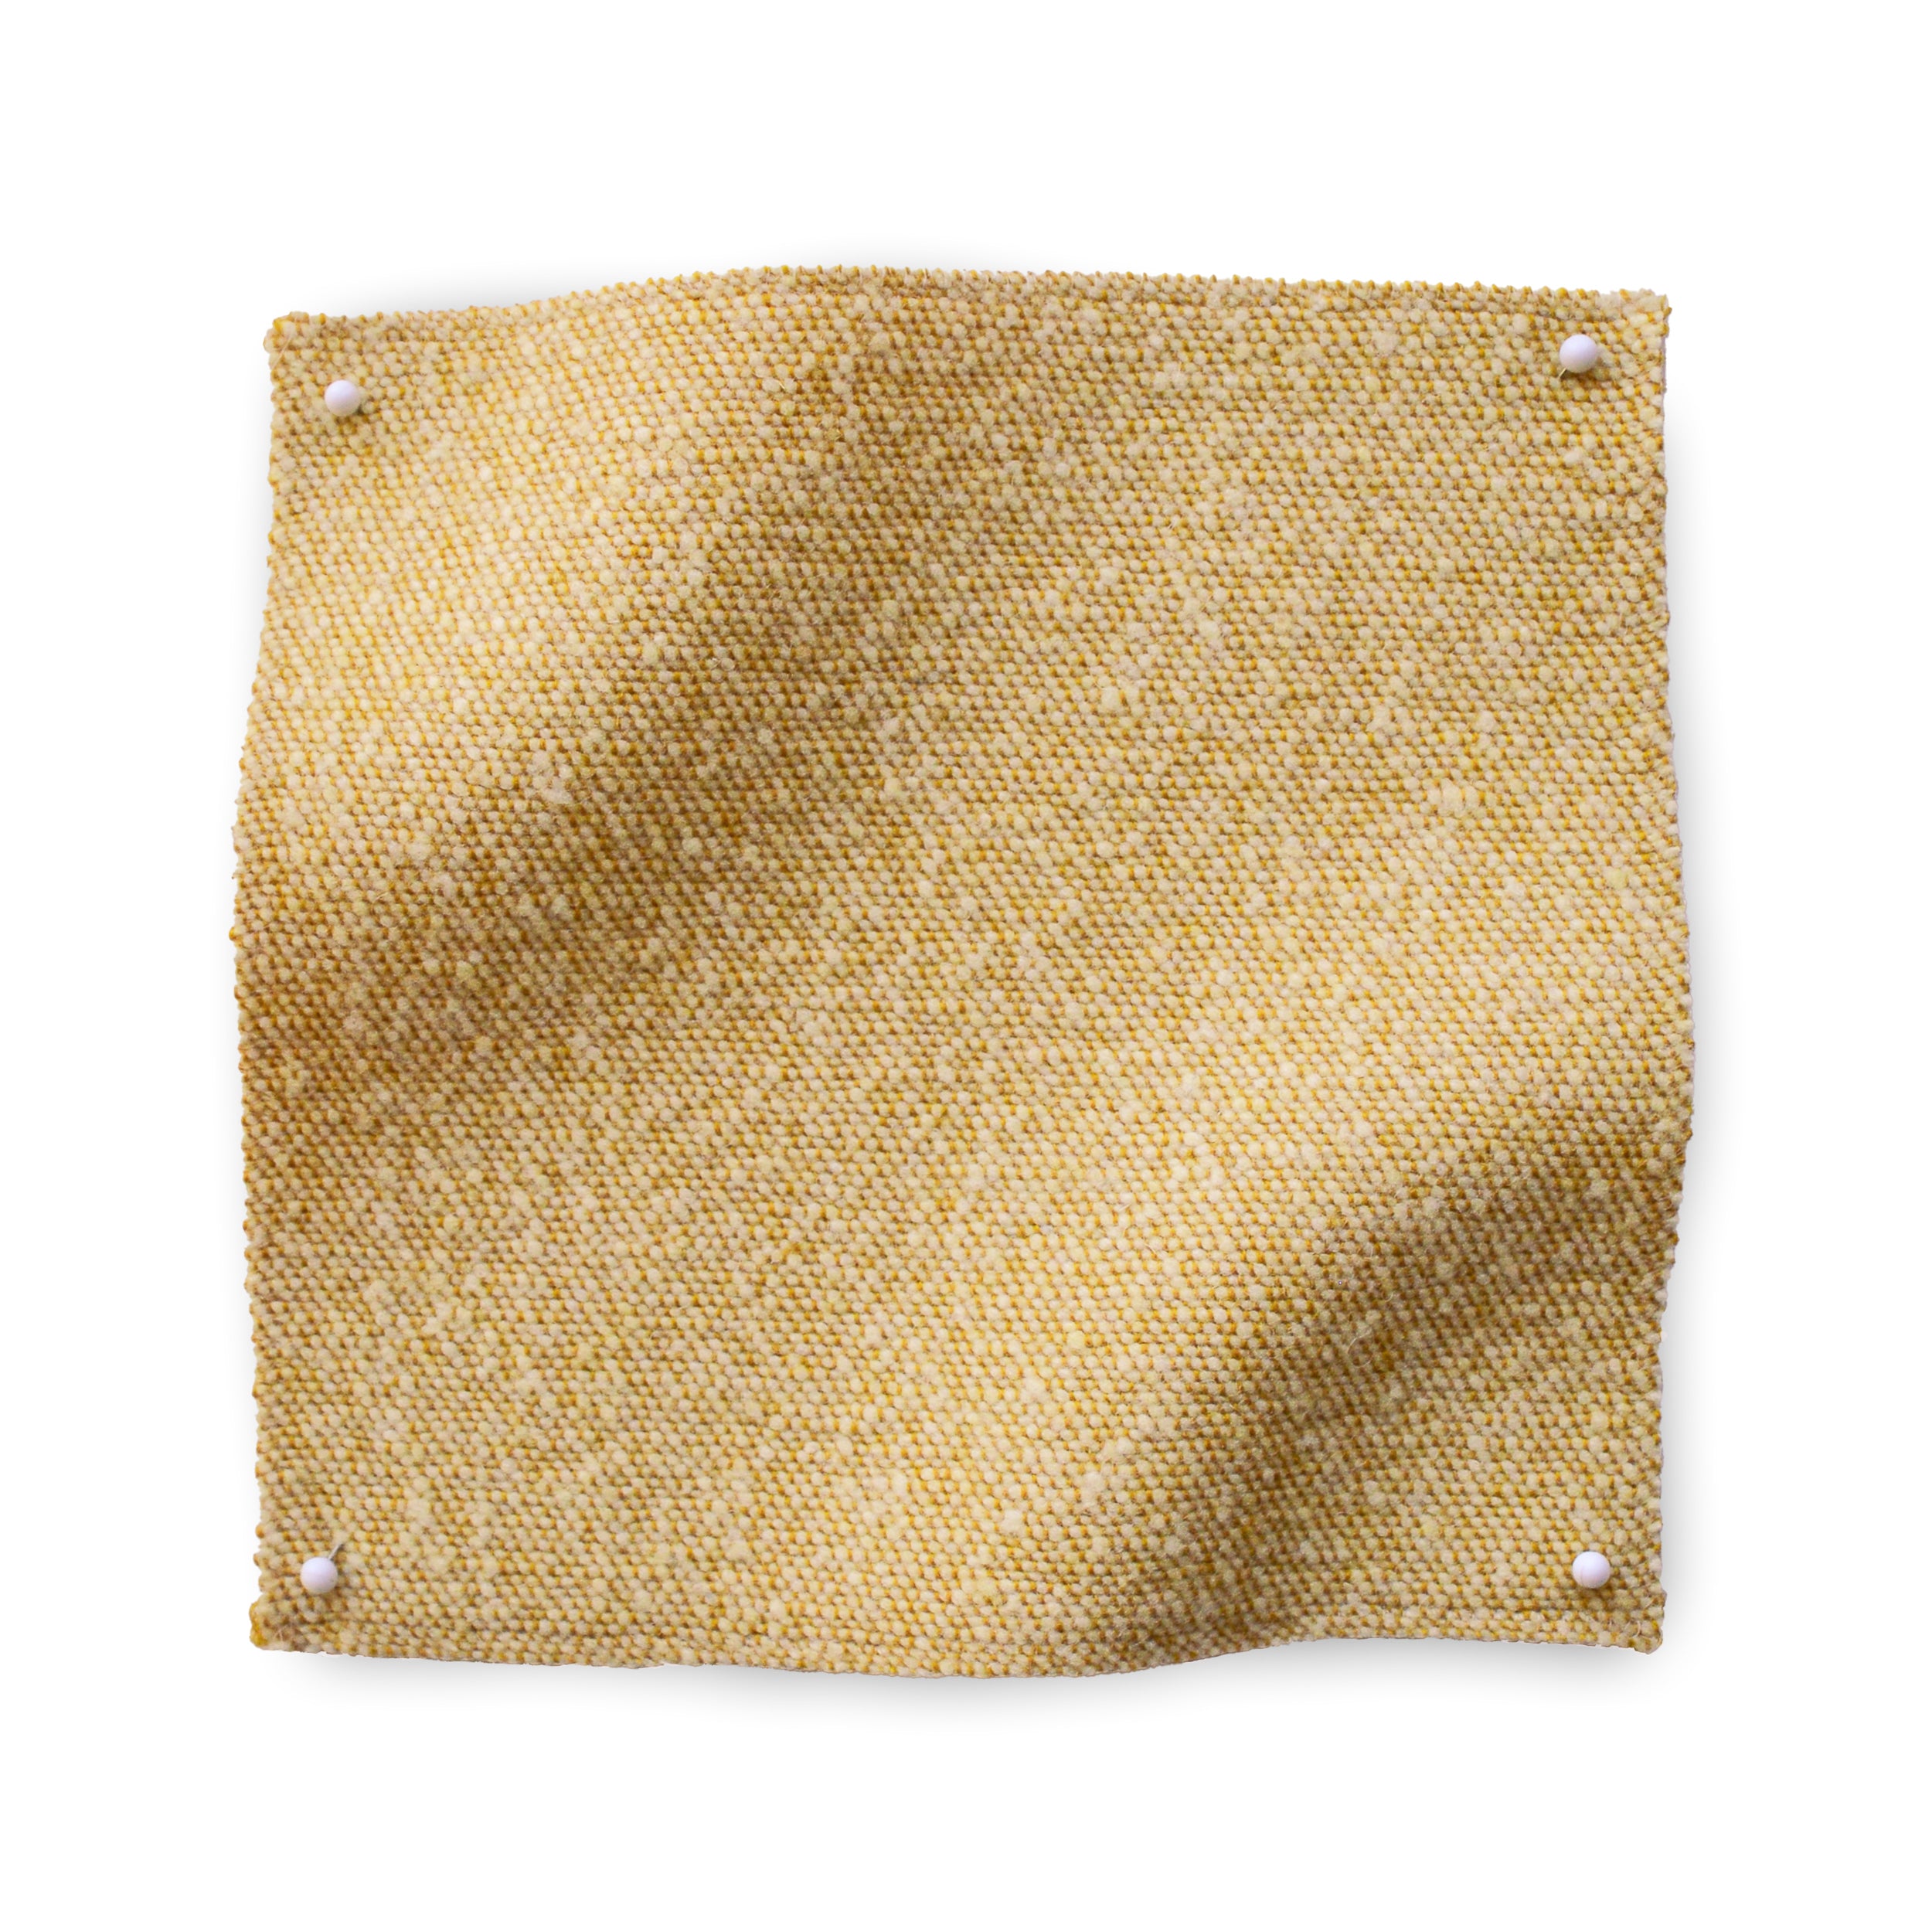 Square fabric swatch of heathered wool in a gold colorway.